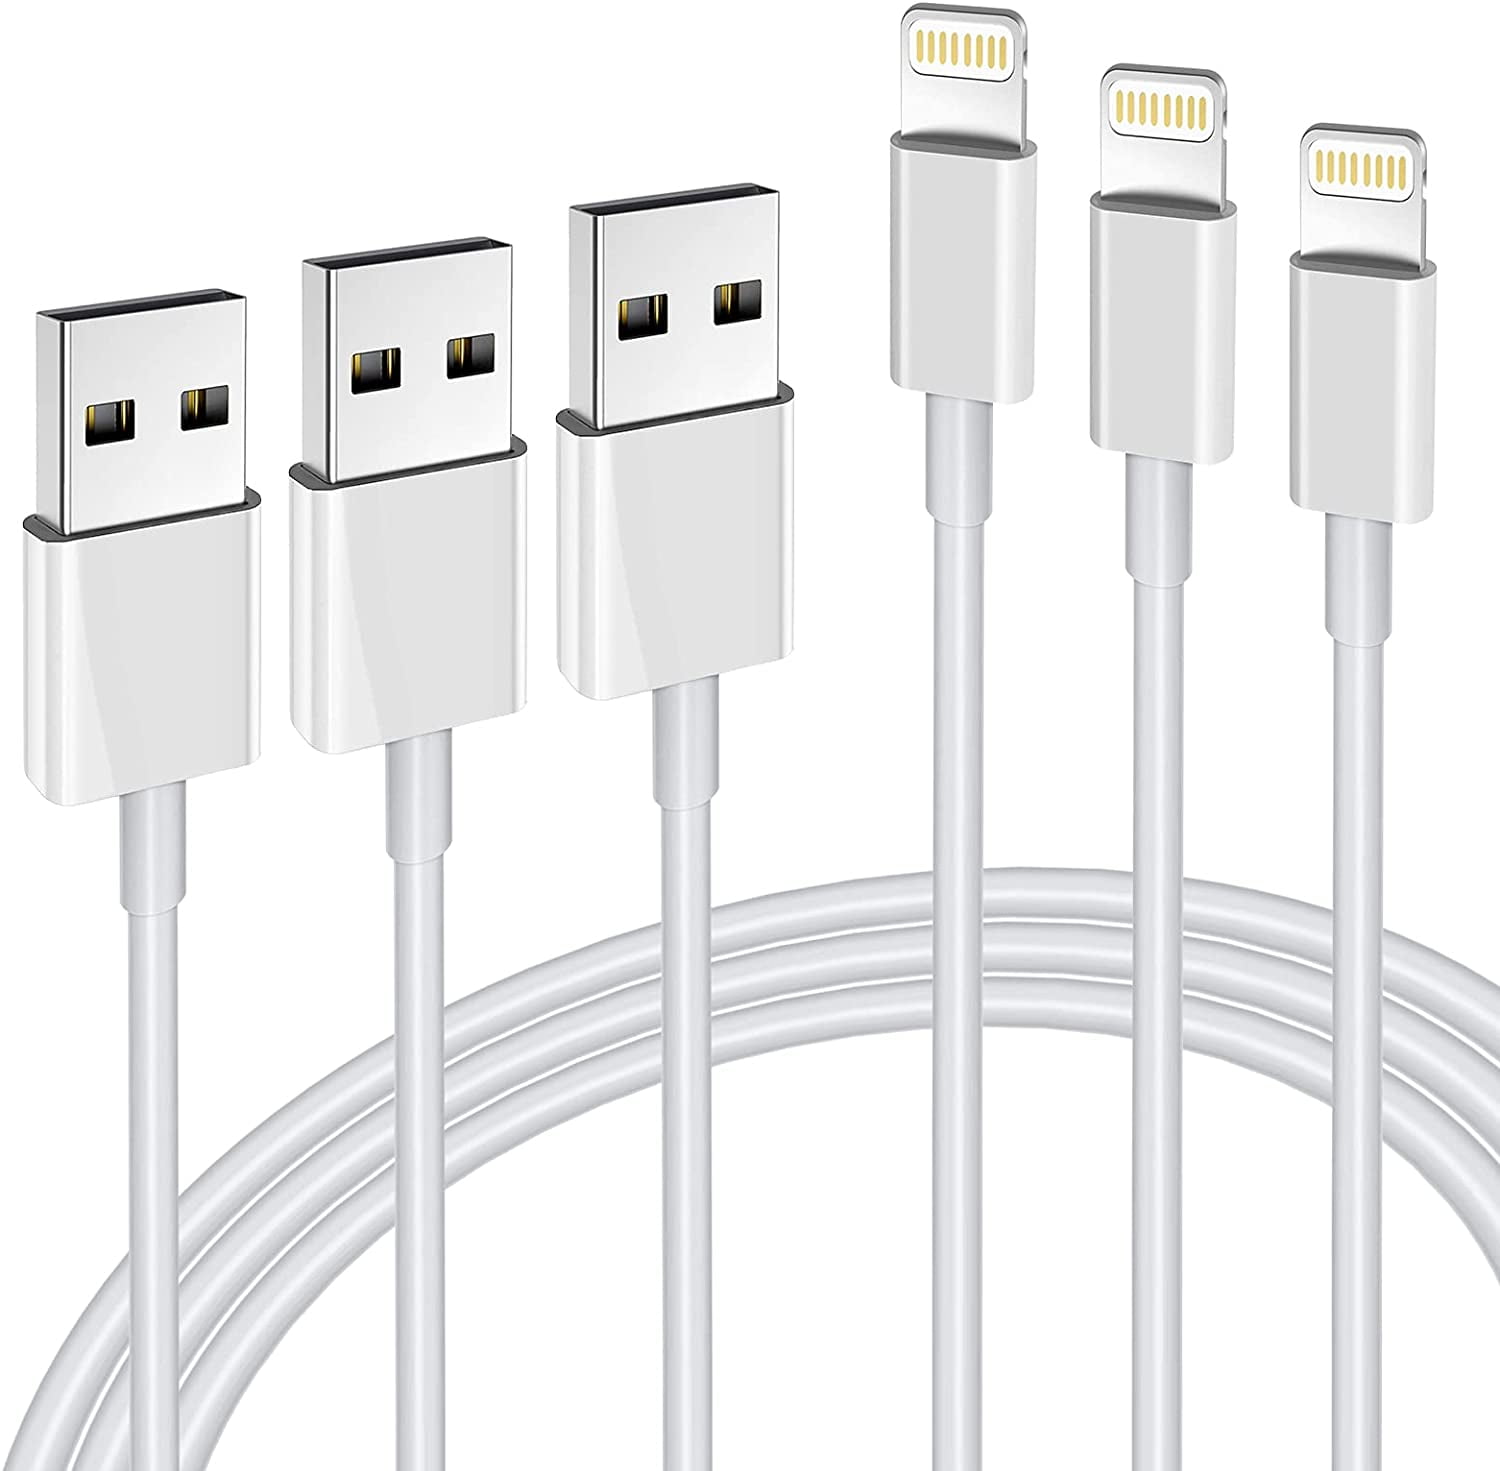 6Foot Long iPhone USB Cables 2.4A Fast Charging Cord Compatible for iPhone 12 Mini 12 Pro Max 11 Pro MAX XS Xr X 6 AirPods-2M White Apple MFi Certified iPhone Charger 6FT 4Pack Lightning Cable 